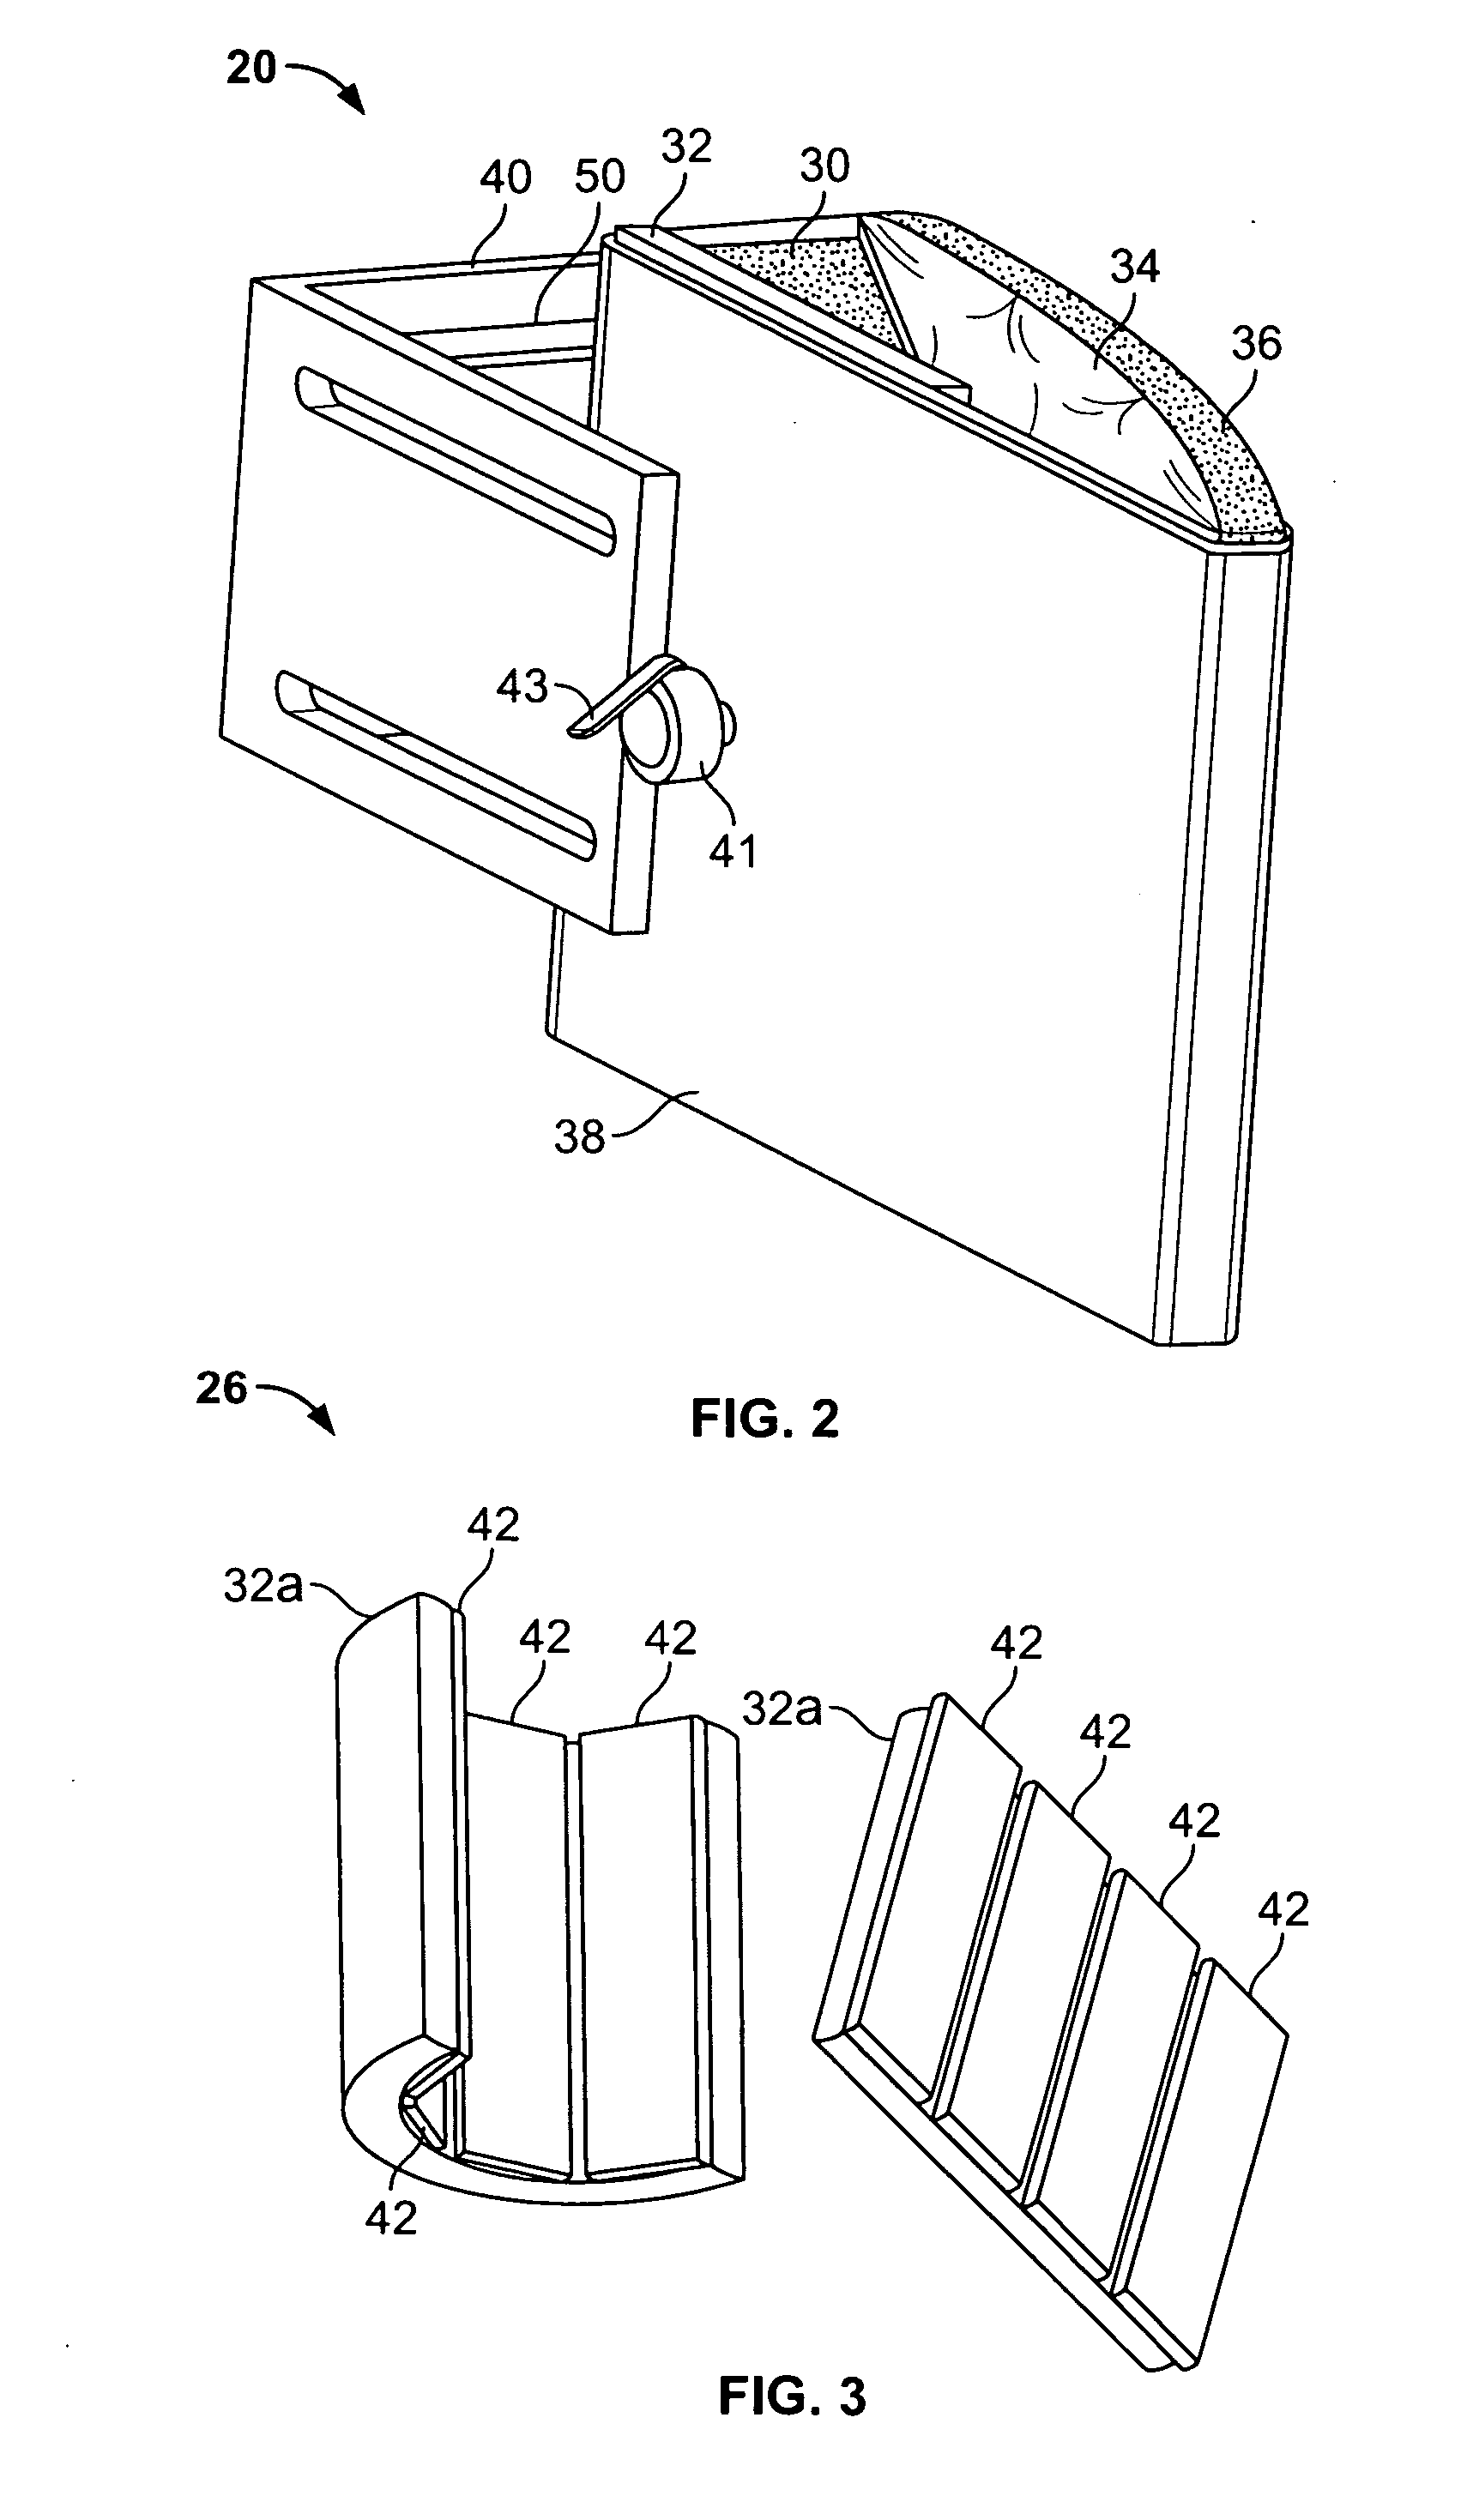 Pneumatic support system for a wheelchair